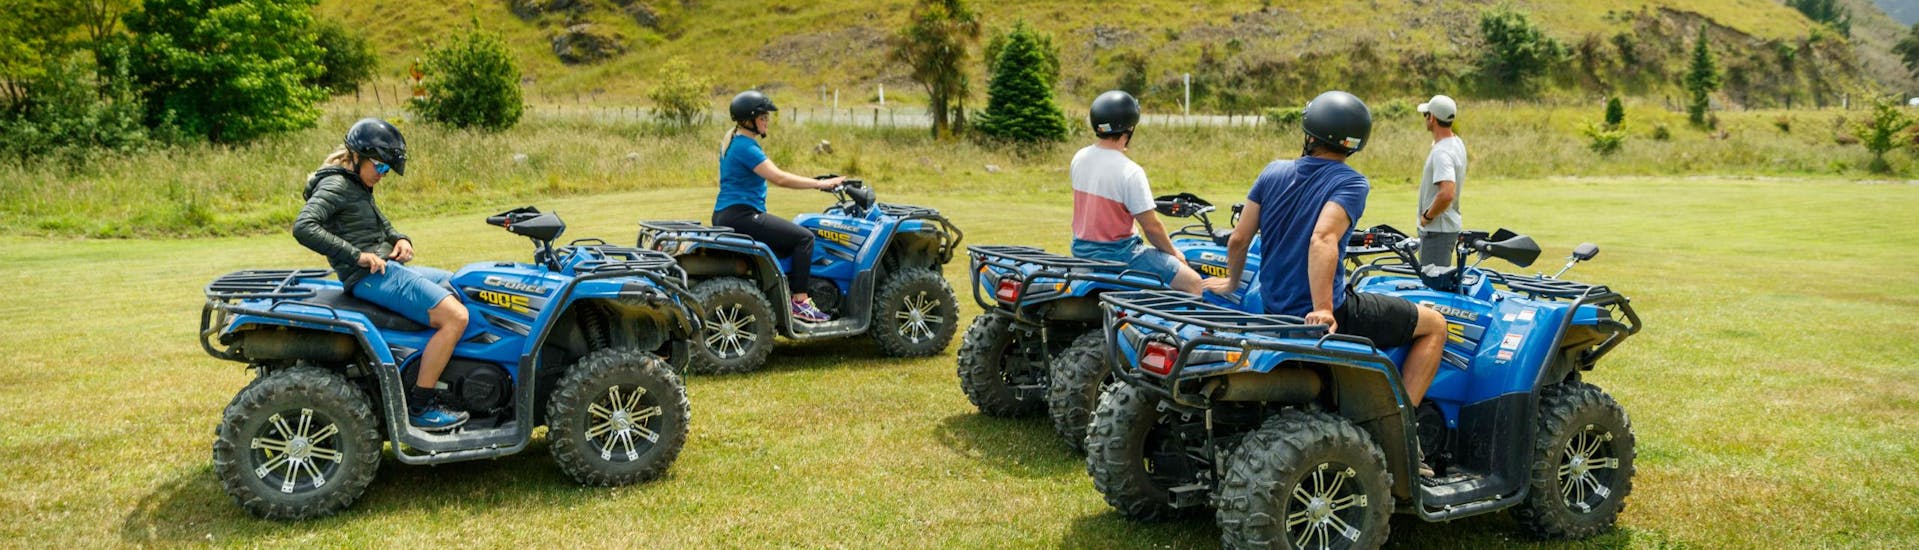 quad-biking-in-nelson-farm-forest-ride-cable-bay-adventure-park-nelson-hero